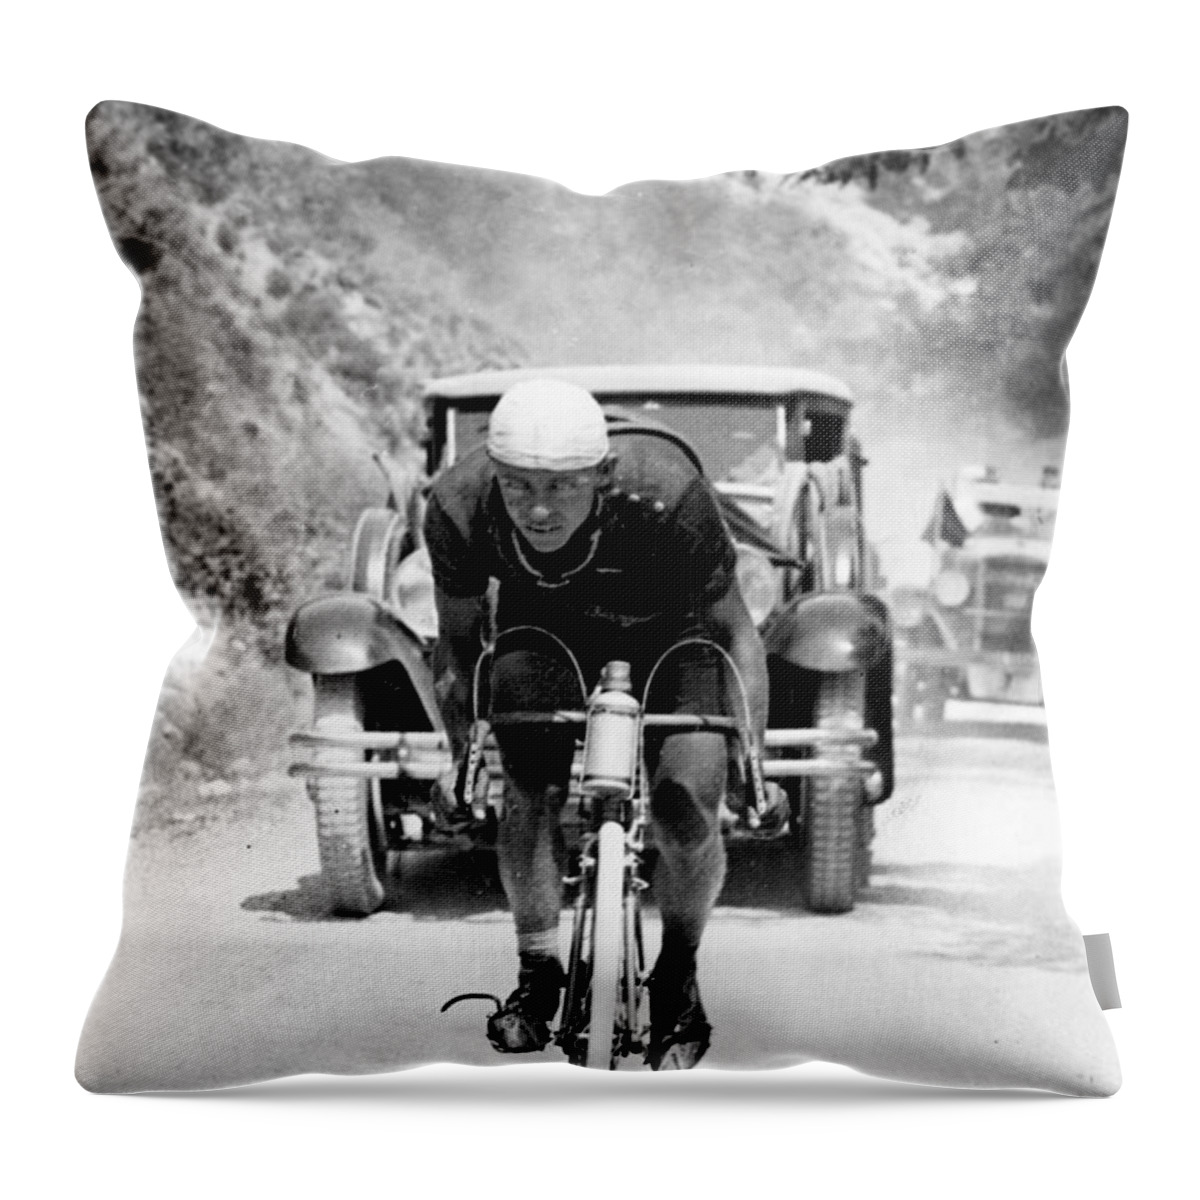 Tour Throw Pillow featuring the photograph Tour De France 1929, 13th Leg Cannes To Nice, Benoit Faure On The Braus Pass by Unknown